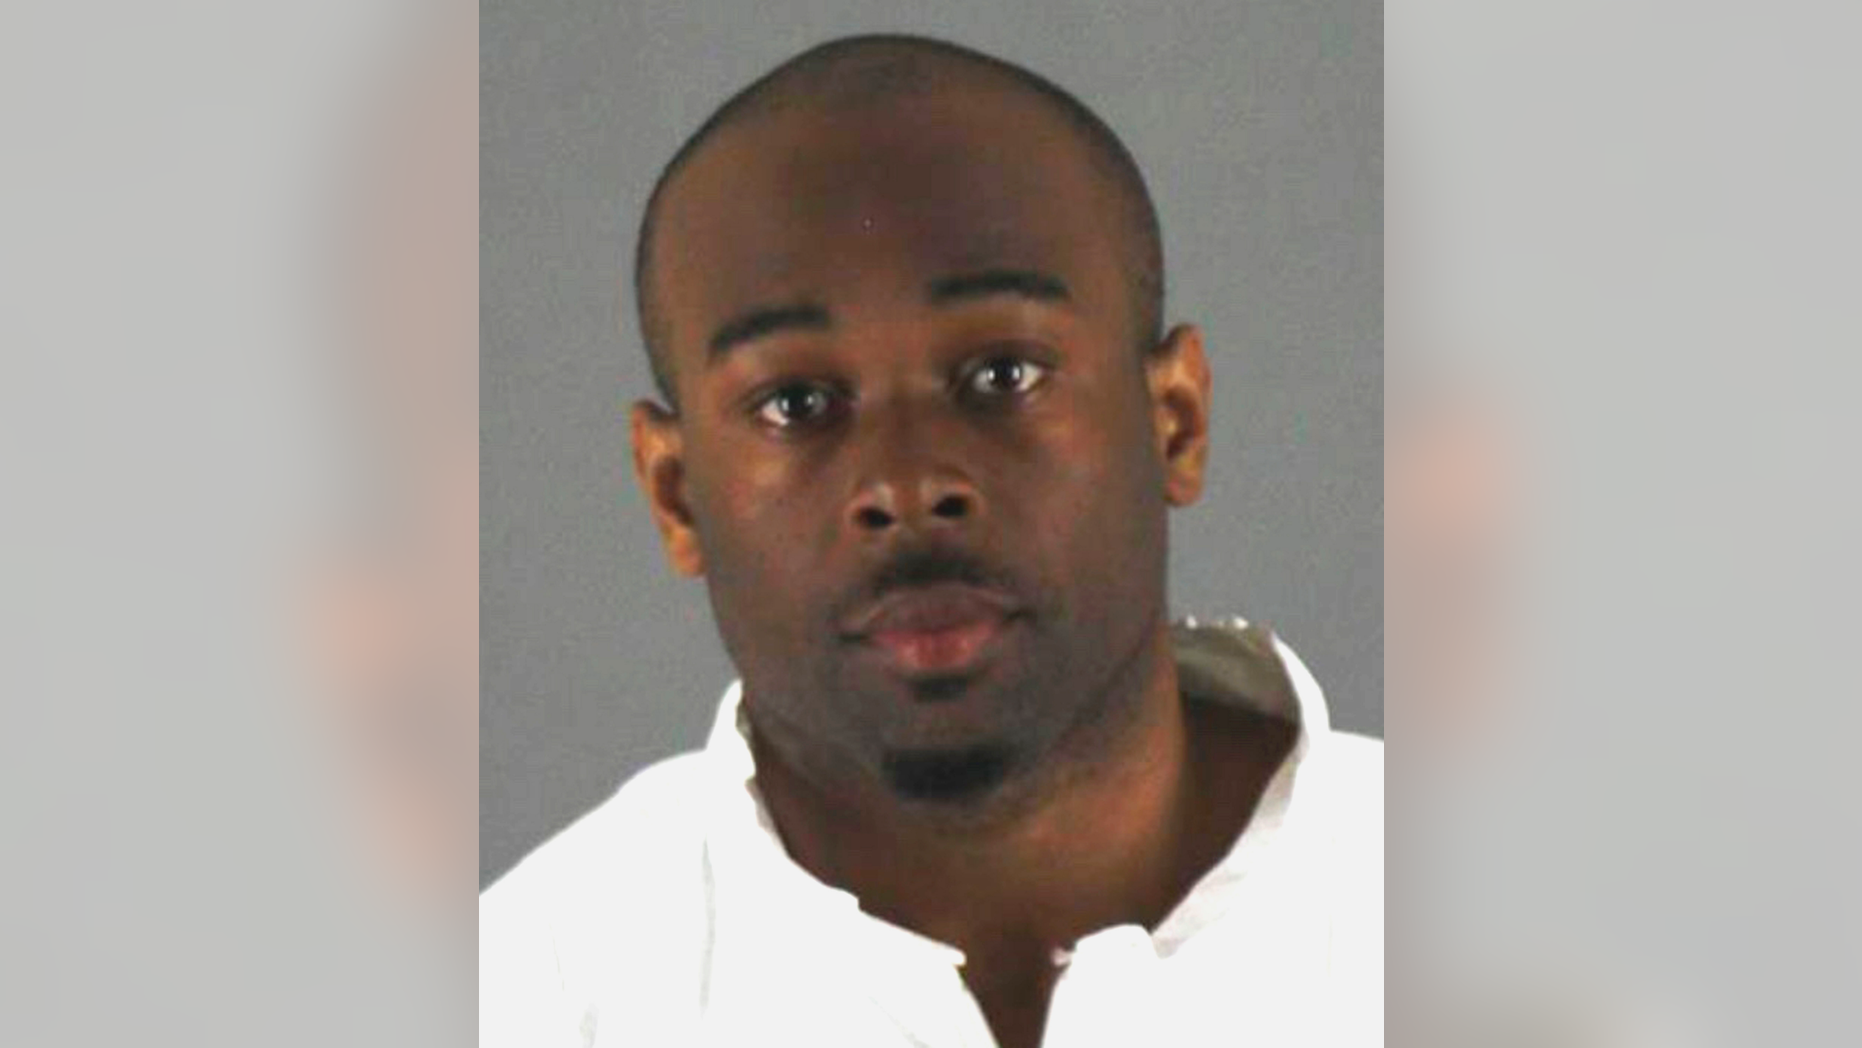 This undated photo provided by the Bloomington, Minnesota Police Department, shows Emmanuel Aranda, who was arrested in connection with an incident at the Mall of America, where a 5-year-old boy collapsed on three Floors, April 12, 2019, after being pushed or thrown from a balcony. Aranda is scheduled to appear in court Tuesday, May 14 for a hearing. (Bloomington Police Department via AP)